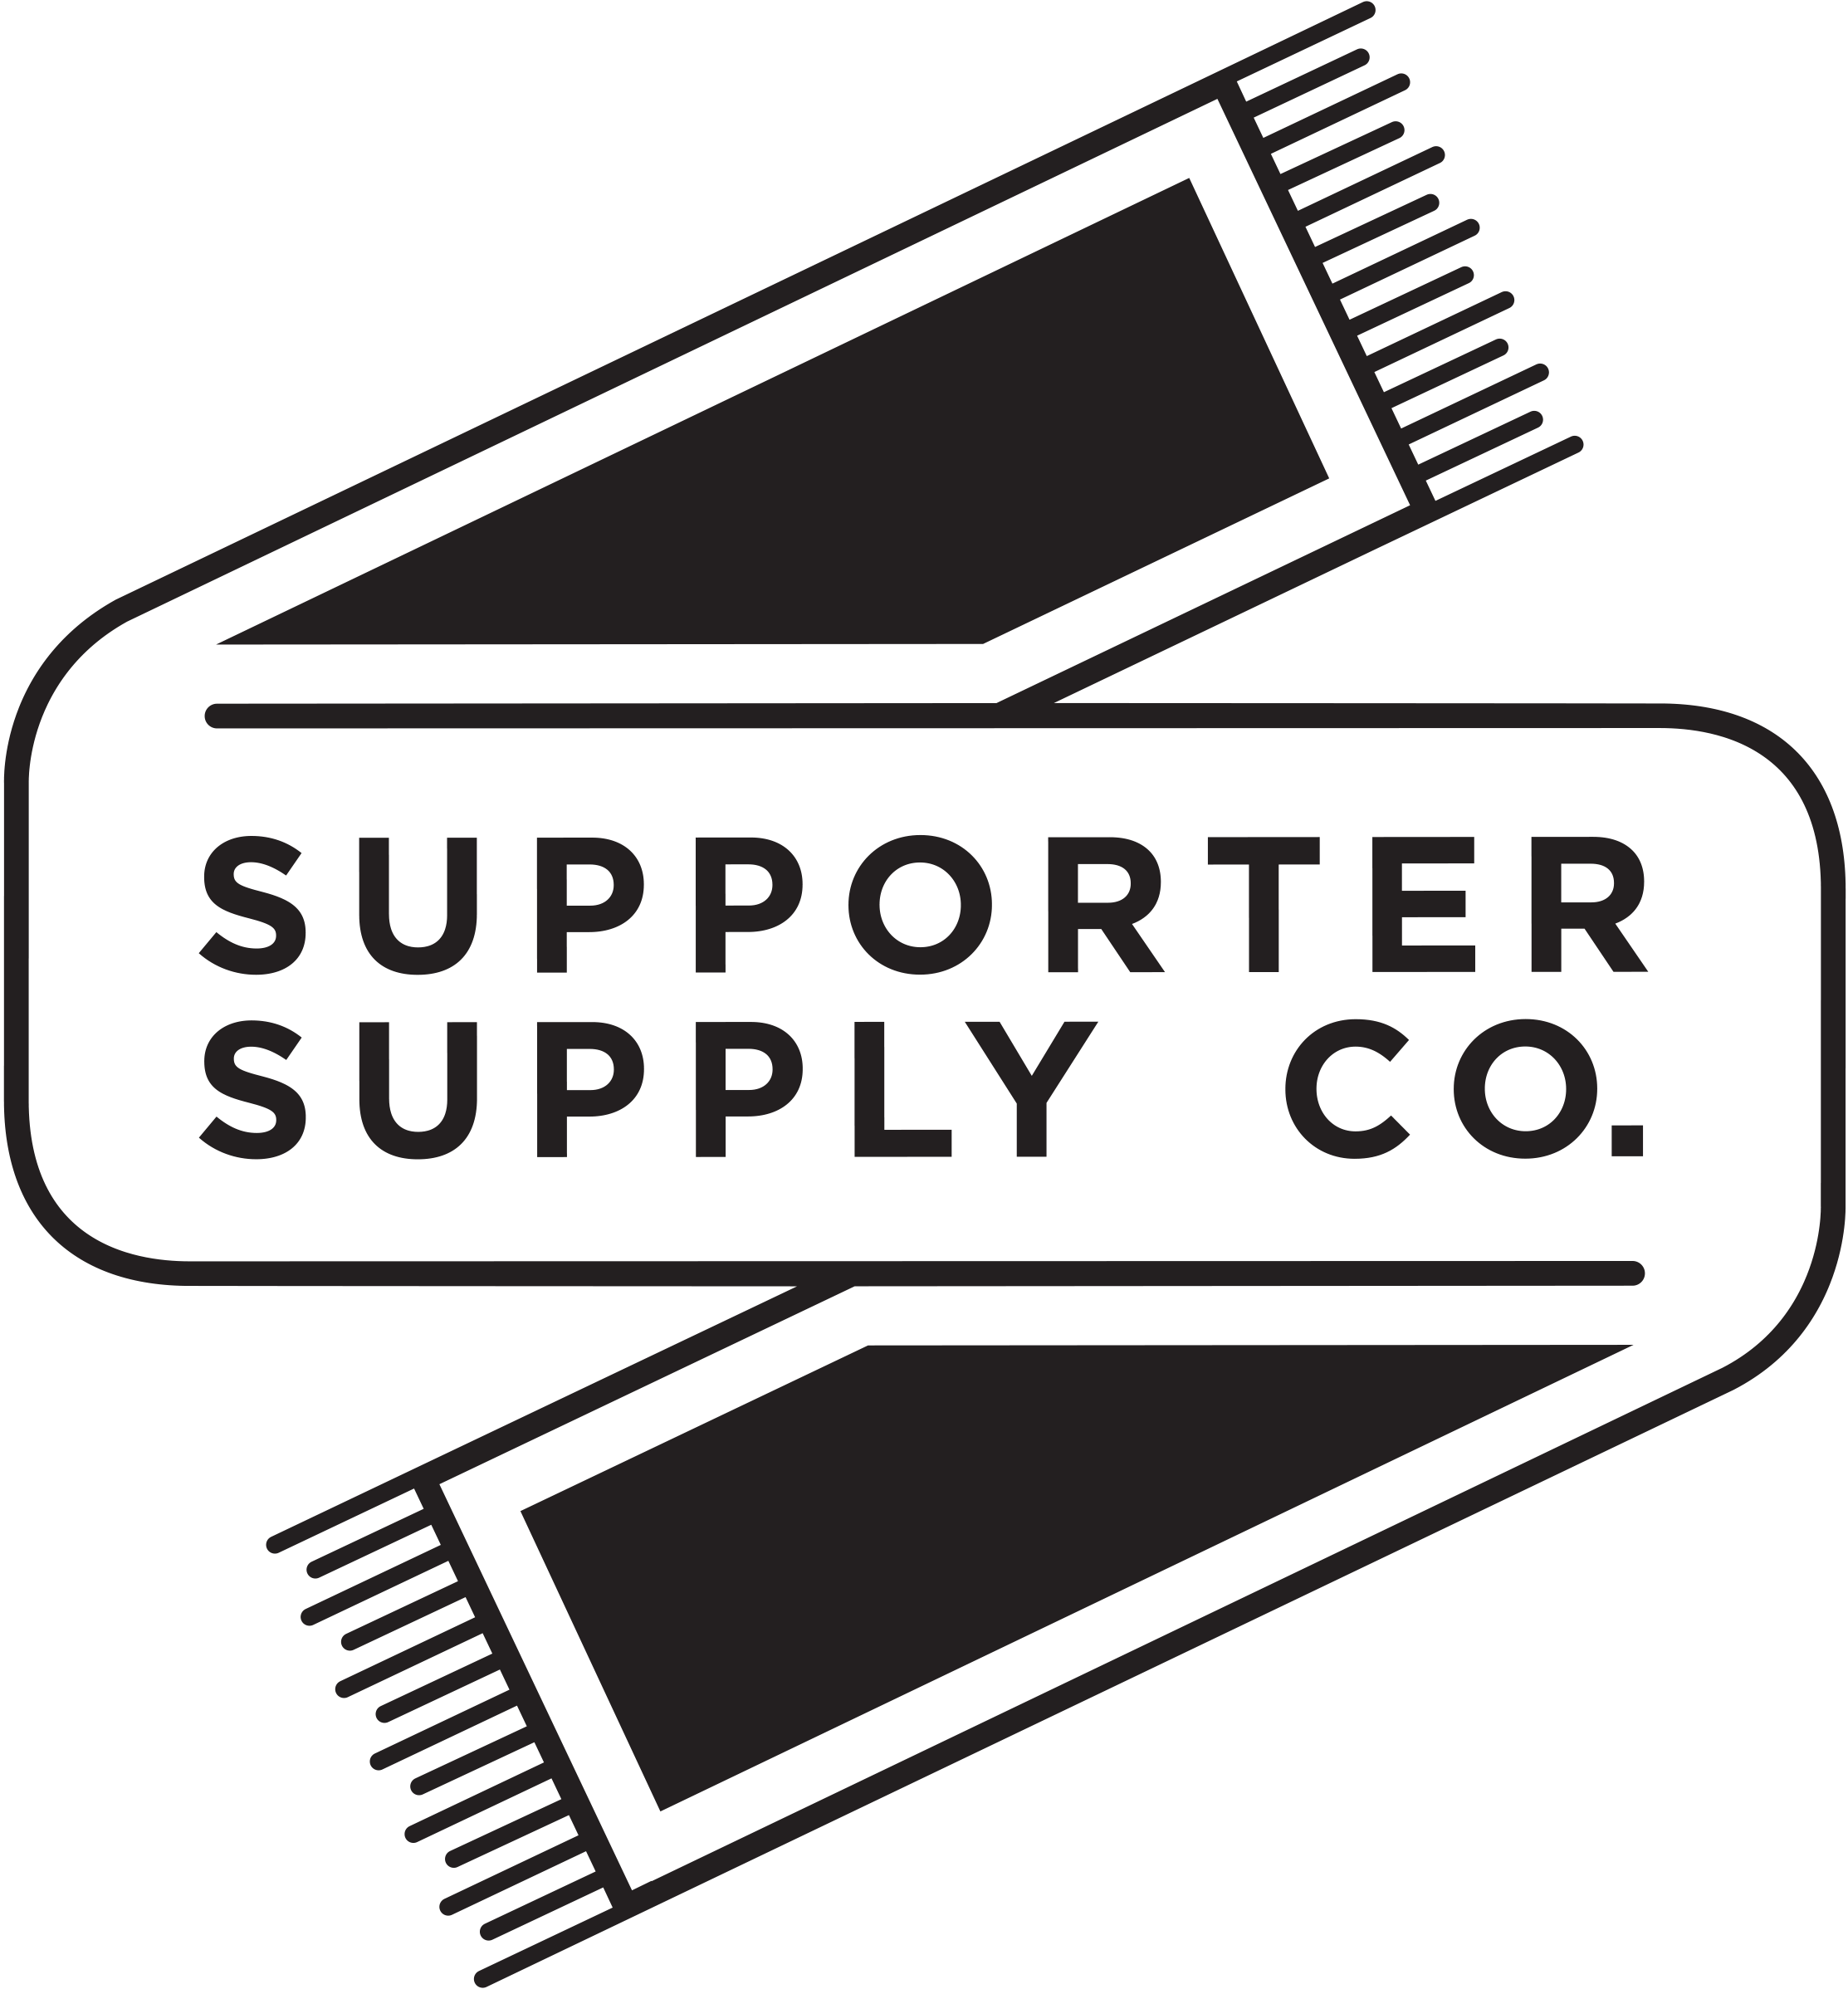 Supporter Supply Co.